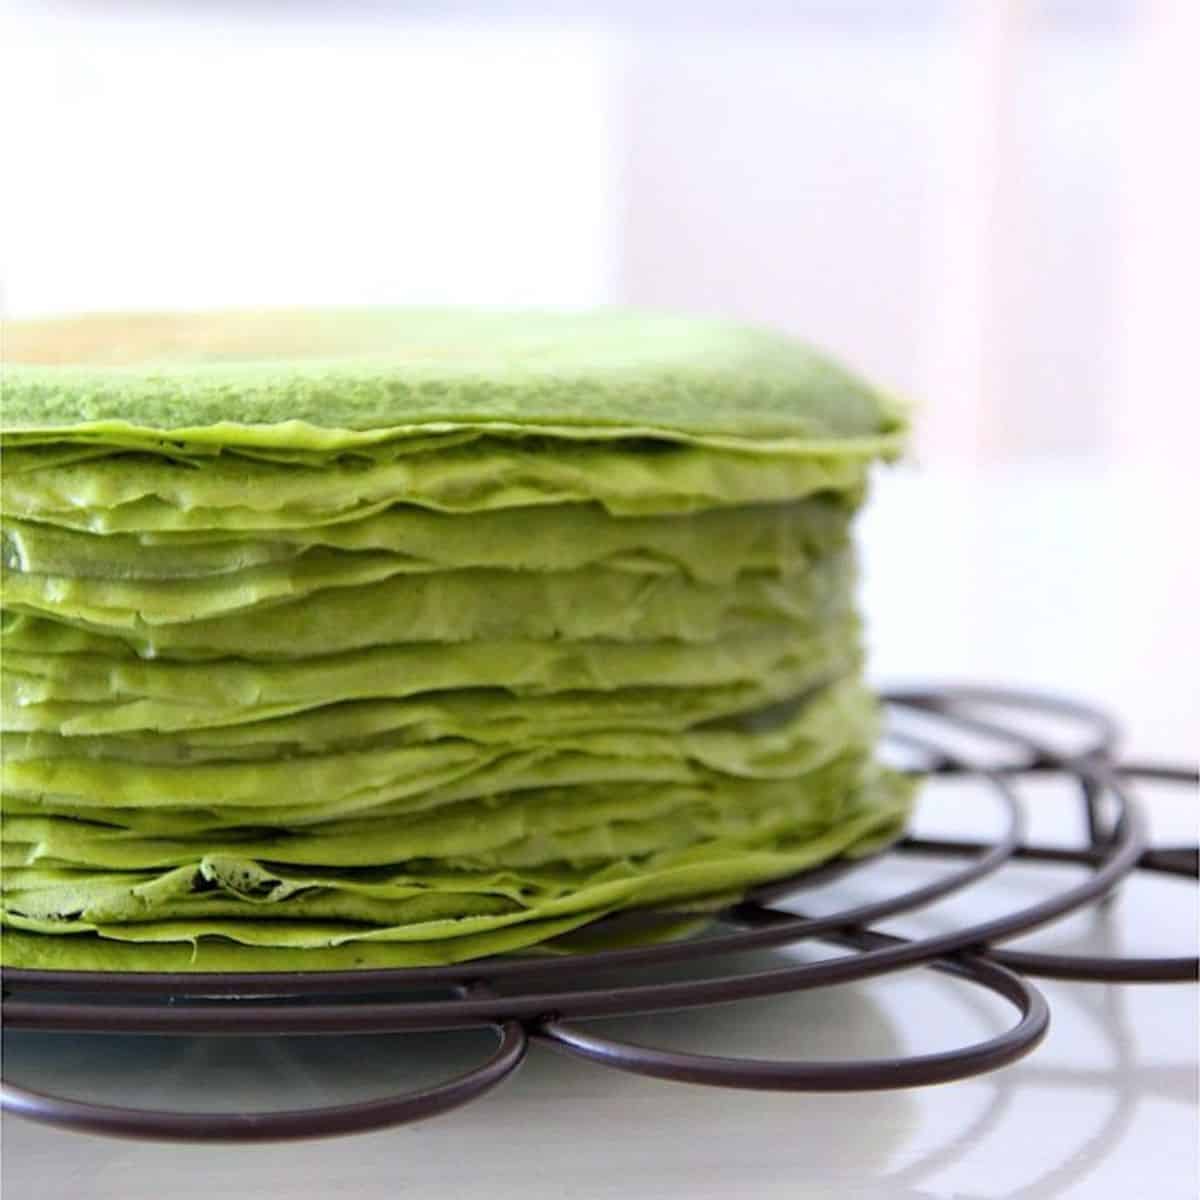  Thin layers of green coloured crepes placed on a white table